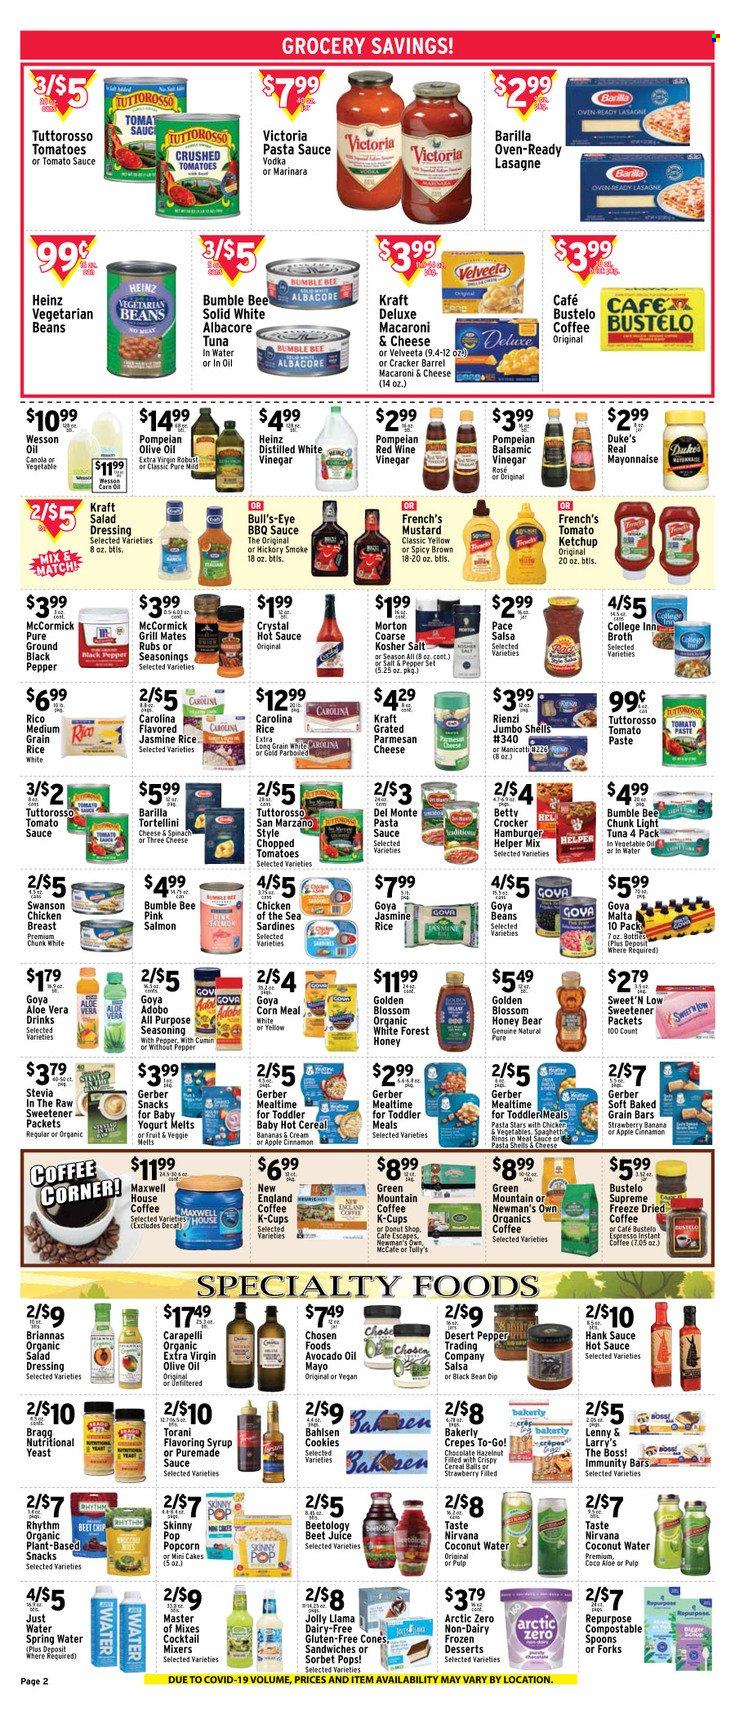 thumbnail - Met Foodmarkets Flyer - 05/28/2023 - 06/03/2023 - Sales products - dessert, crepes, corn, sardines, tuna, macaroni & cheese, spaghetti, pasta sauce, Bumble Bee, sauce, tortellini, Barilla, lasagna meal, Kraft®, snack, parmesan, yoghurt, Blossom, mayonnaise, dip, sorbet, cookies, crackers, Gerber, Skinny Pop, broth, stevia, sweetener, crushed tomatoes, tomato paste, tomato sauce, tuna in water, Heinz, light tuna, Chicken of the Sea, Goya, chopped tomatoes, Del Monte, cereals, jasmine rice, parboiled rice, spice, cumin, cinnamon, adobo sauce, BBQ sauce, mustard, salad dressing, hot sauce, ketchup, dressing, salsa, avocado oil, balsamic vinegar, vinegar, wine vinegar, olive oil, honey, juice, coconut water, beetroot juice, spring water, water, Maxwell House, coffee, instant coffee, coffee capsules, McCafe, K-Cups, Green Mountain, alcohol, vodka, chicken breasts, chicken. Page 2.